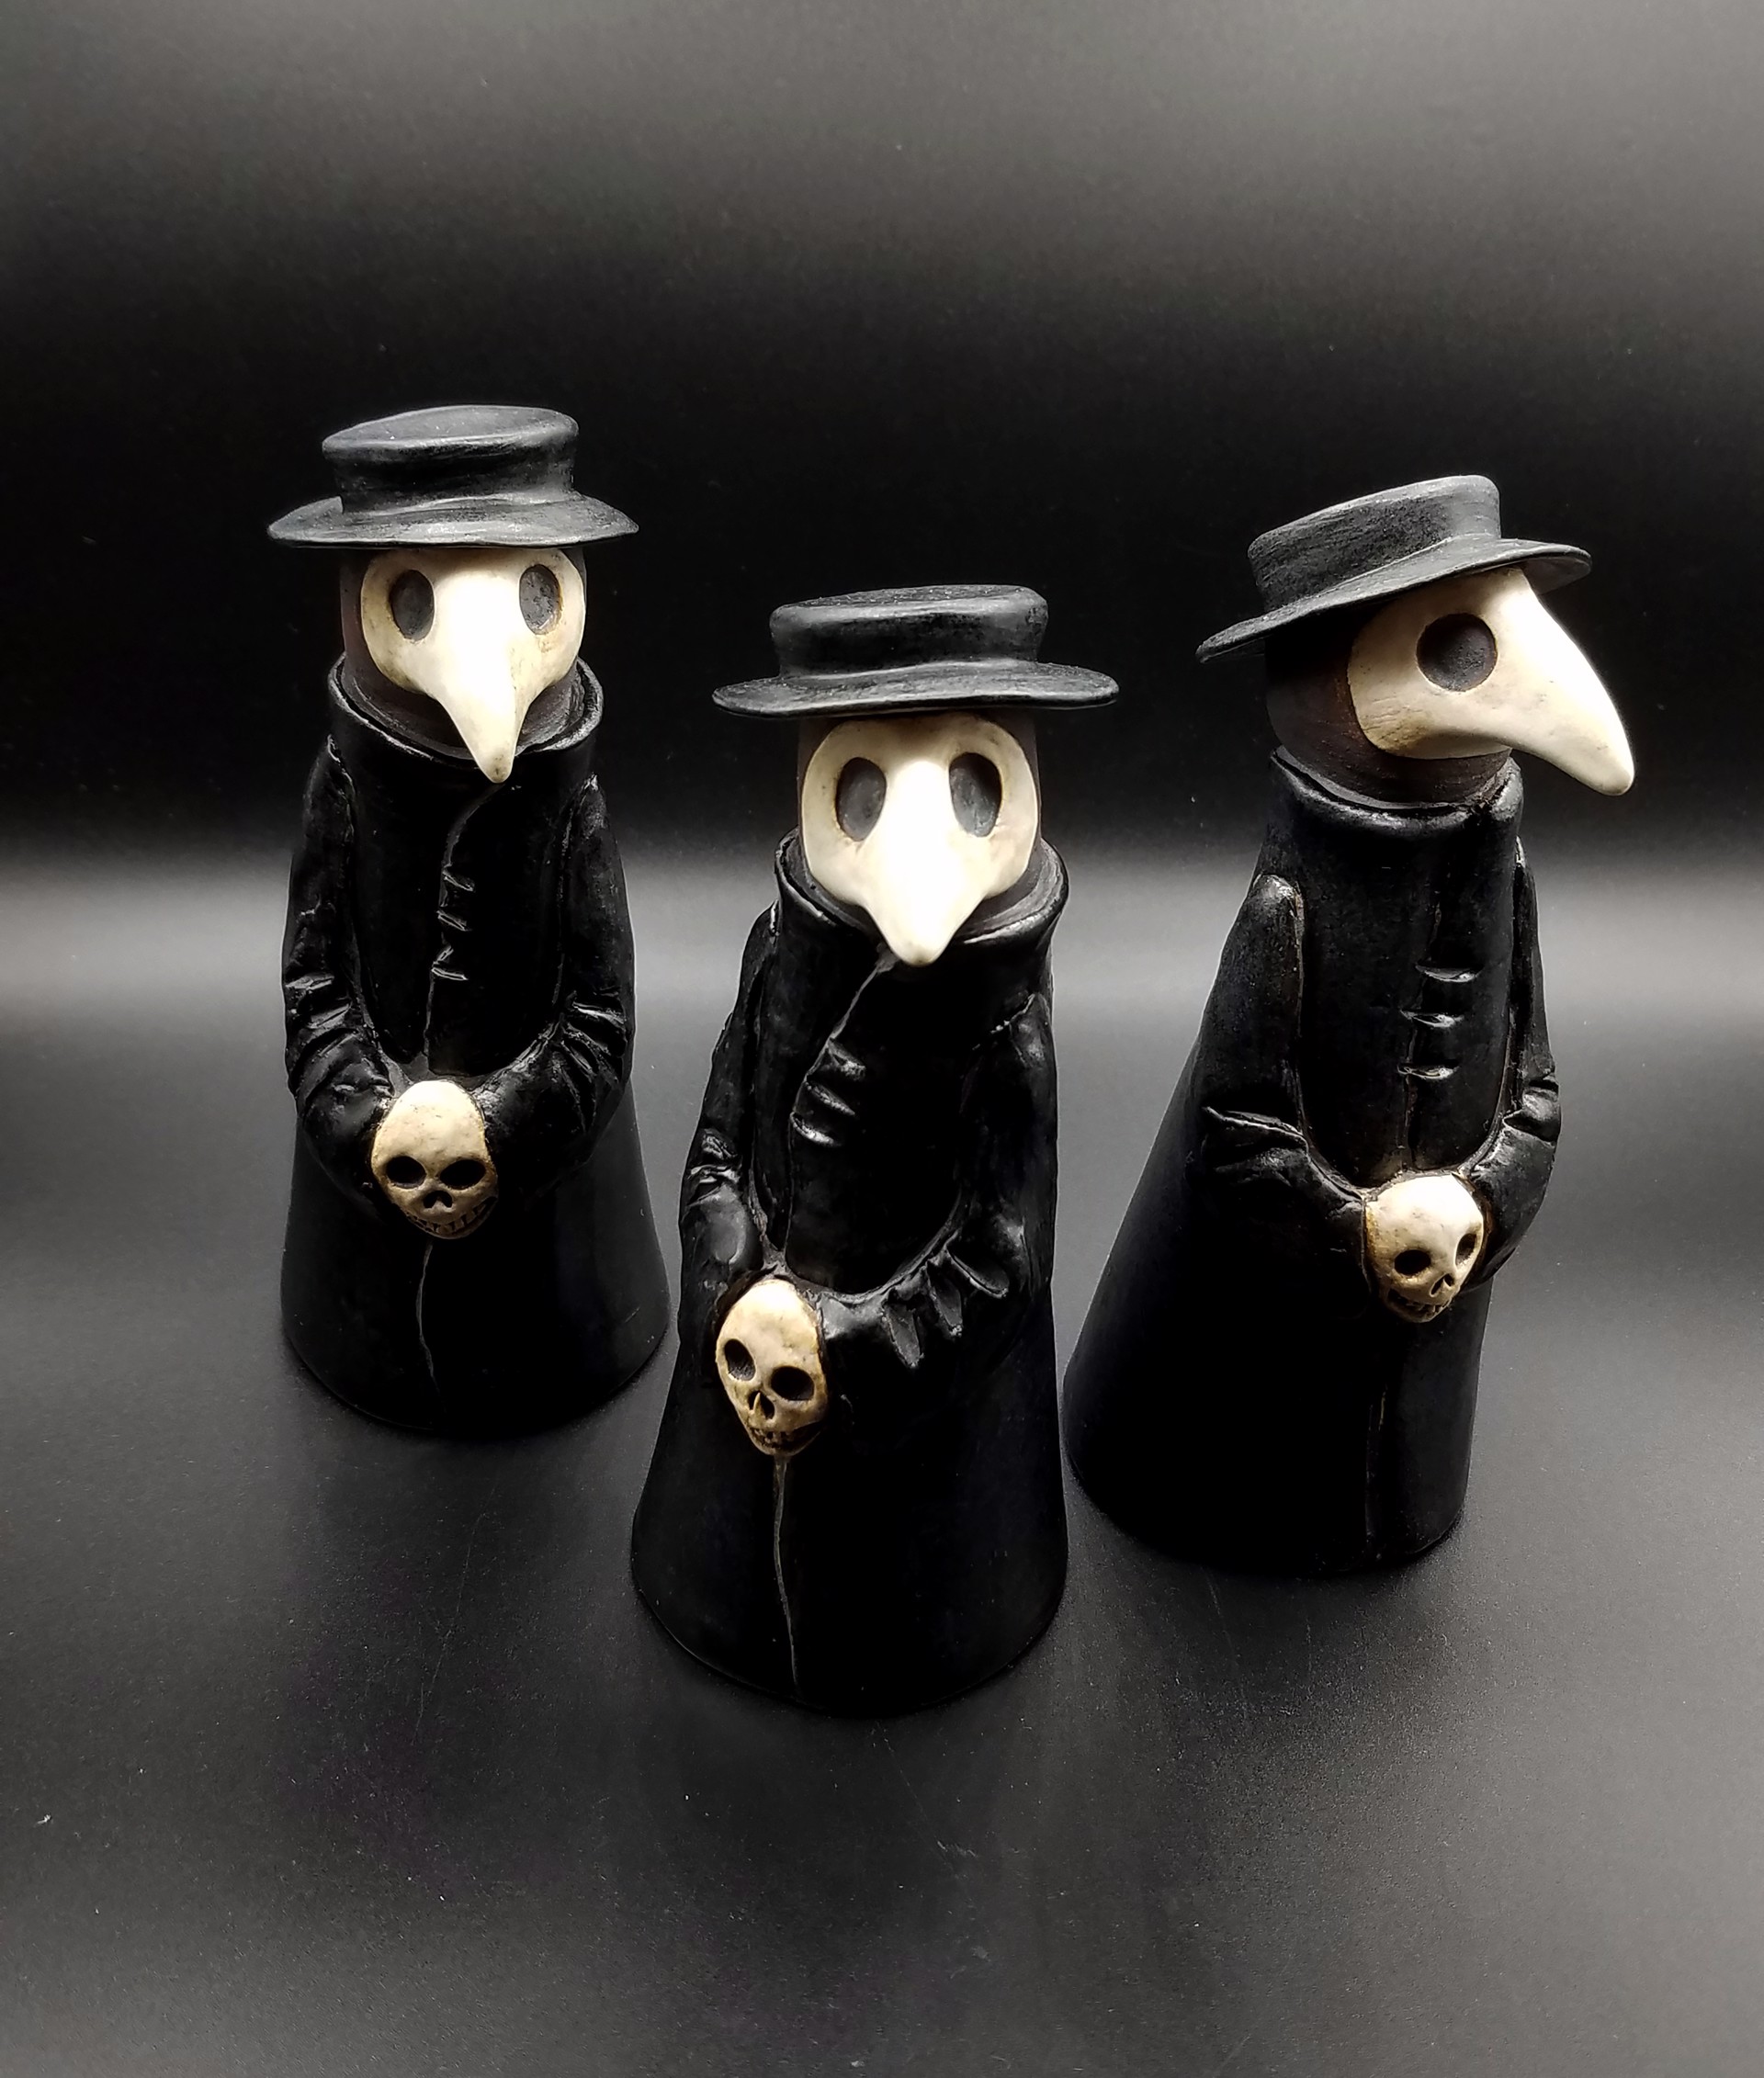 Plague Doctor (Mini) by Michelle Gallagher